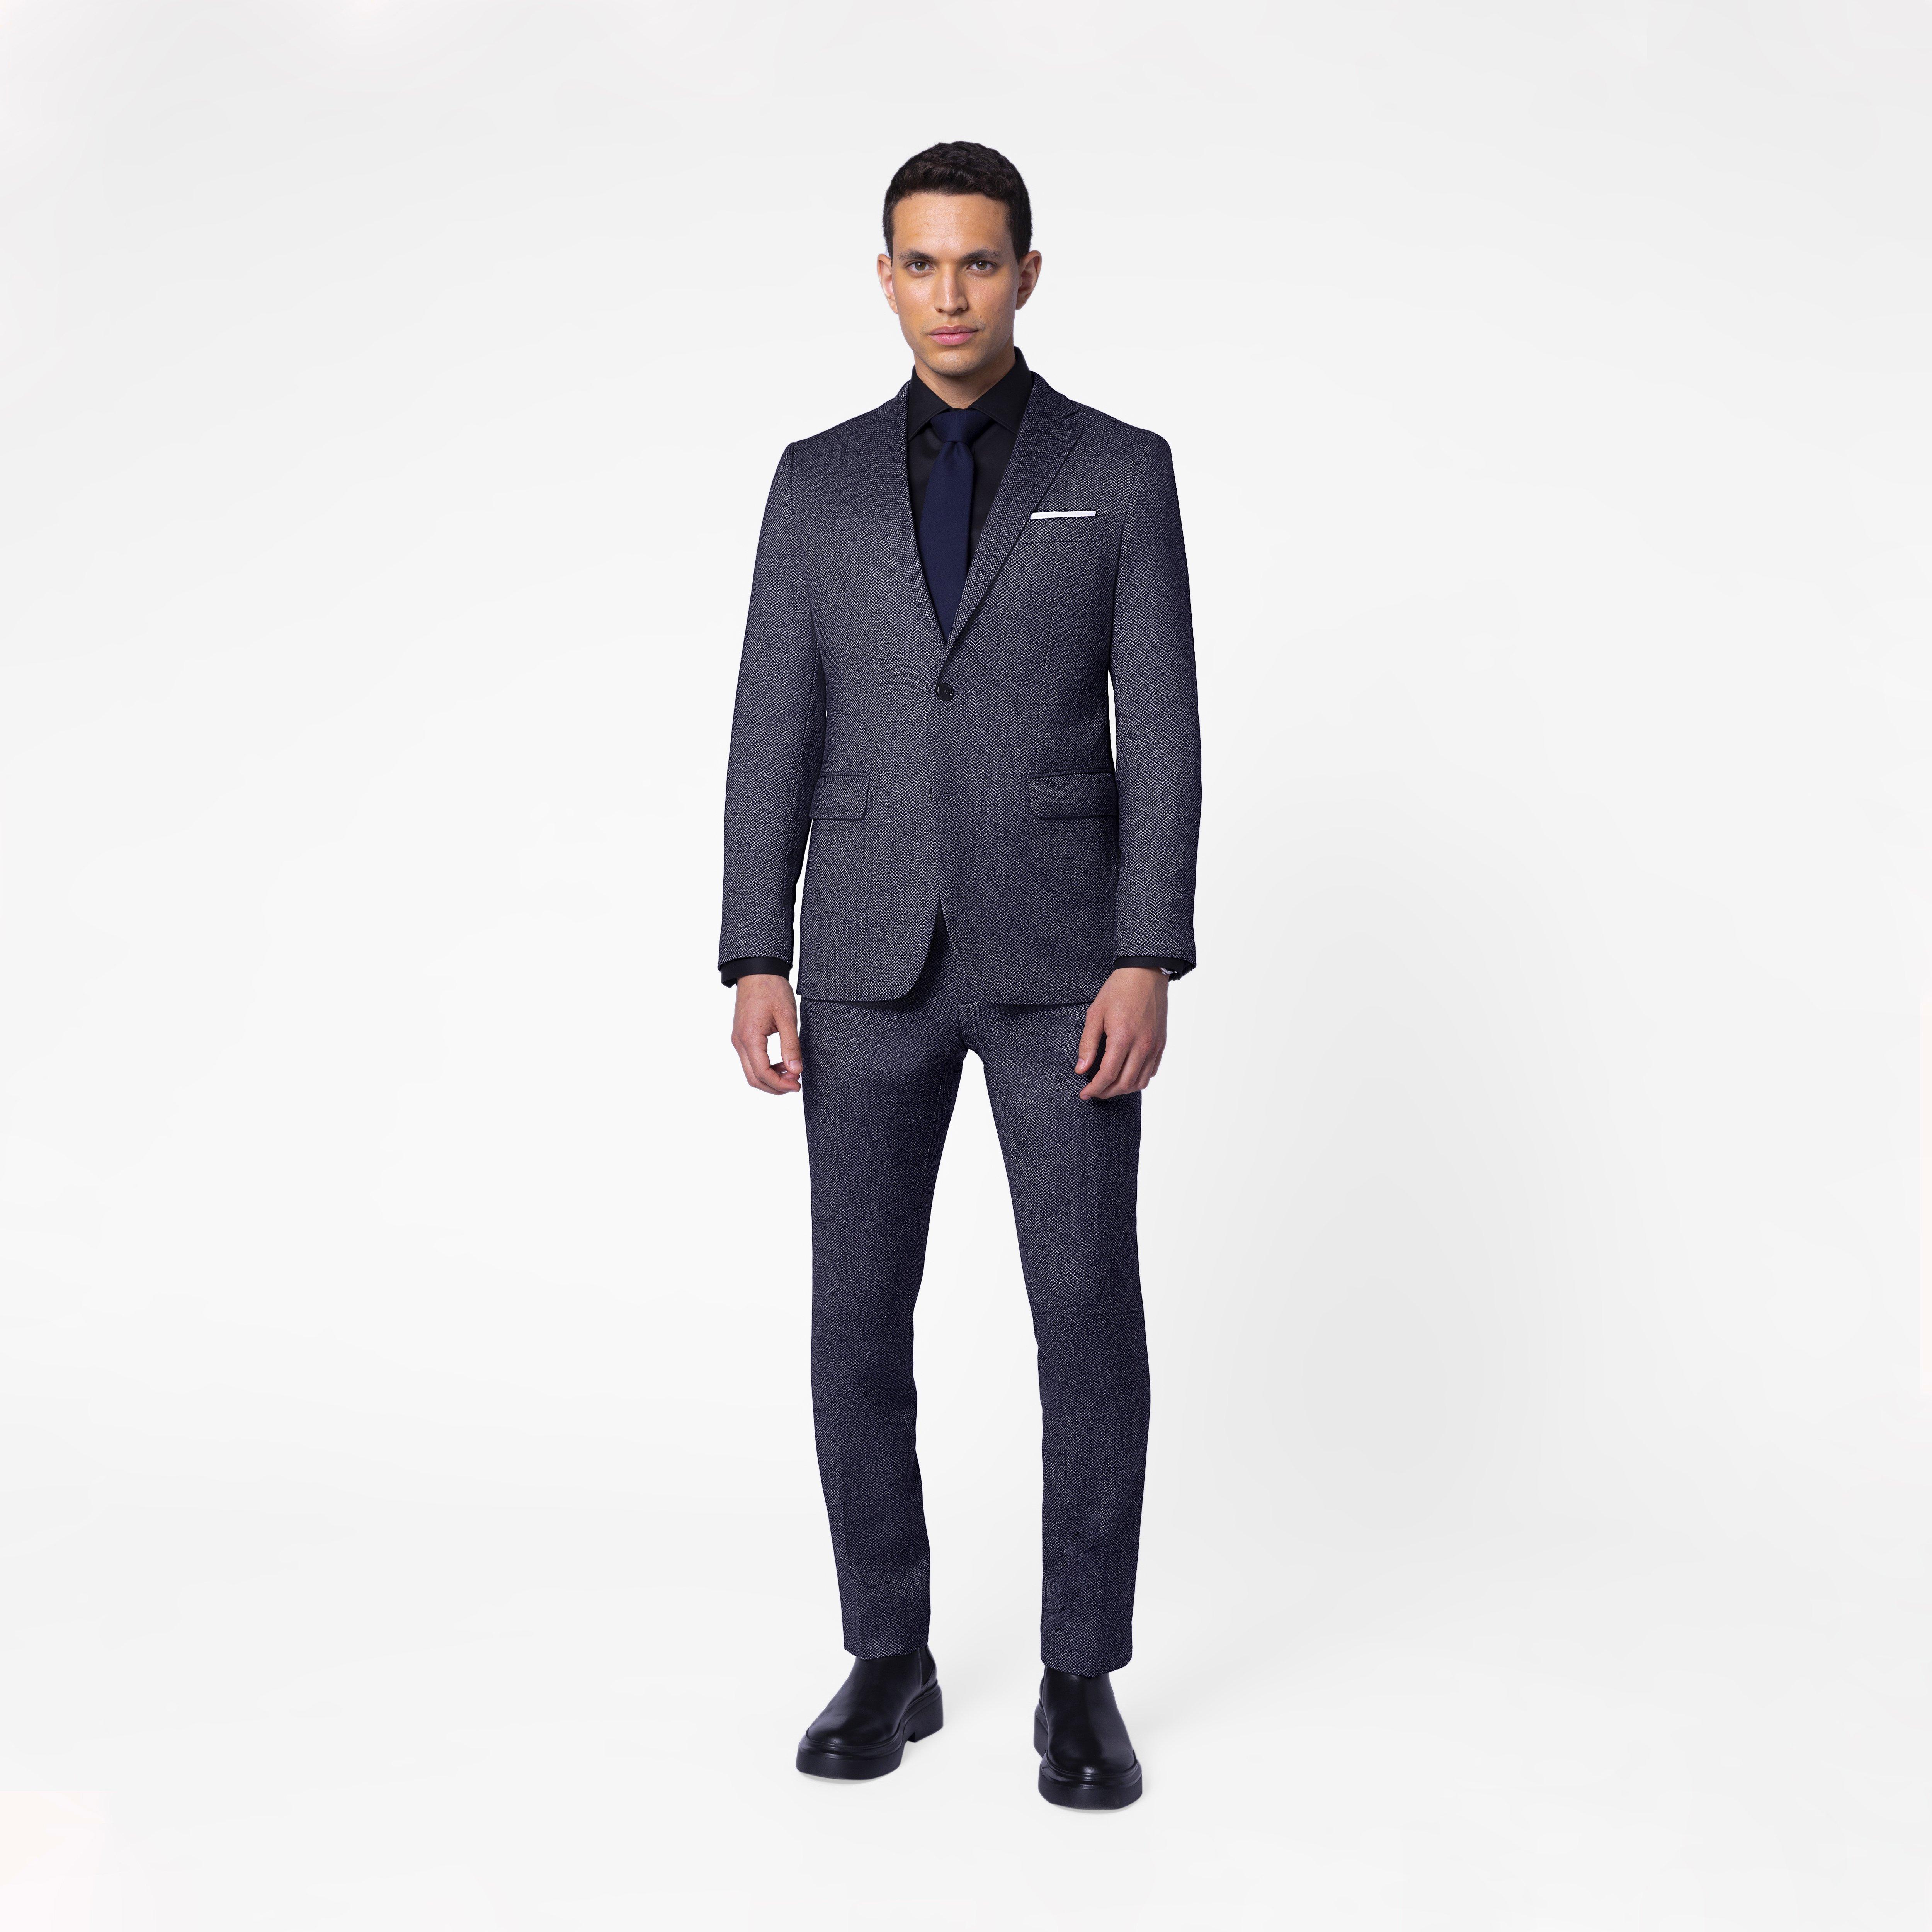 Custom Suits Made For You - Johnstone Dobby Charcoal Suit | INDOCHINO